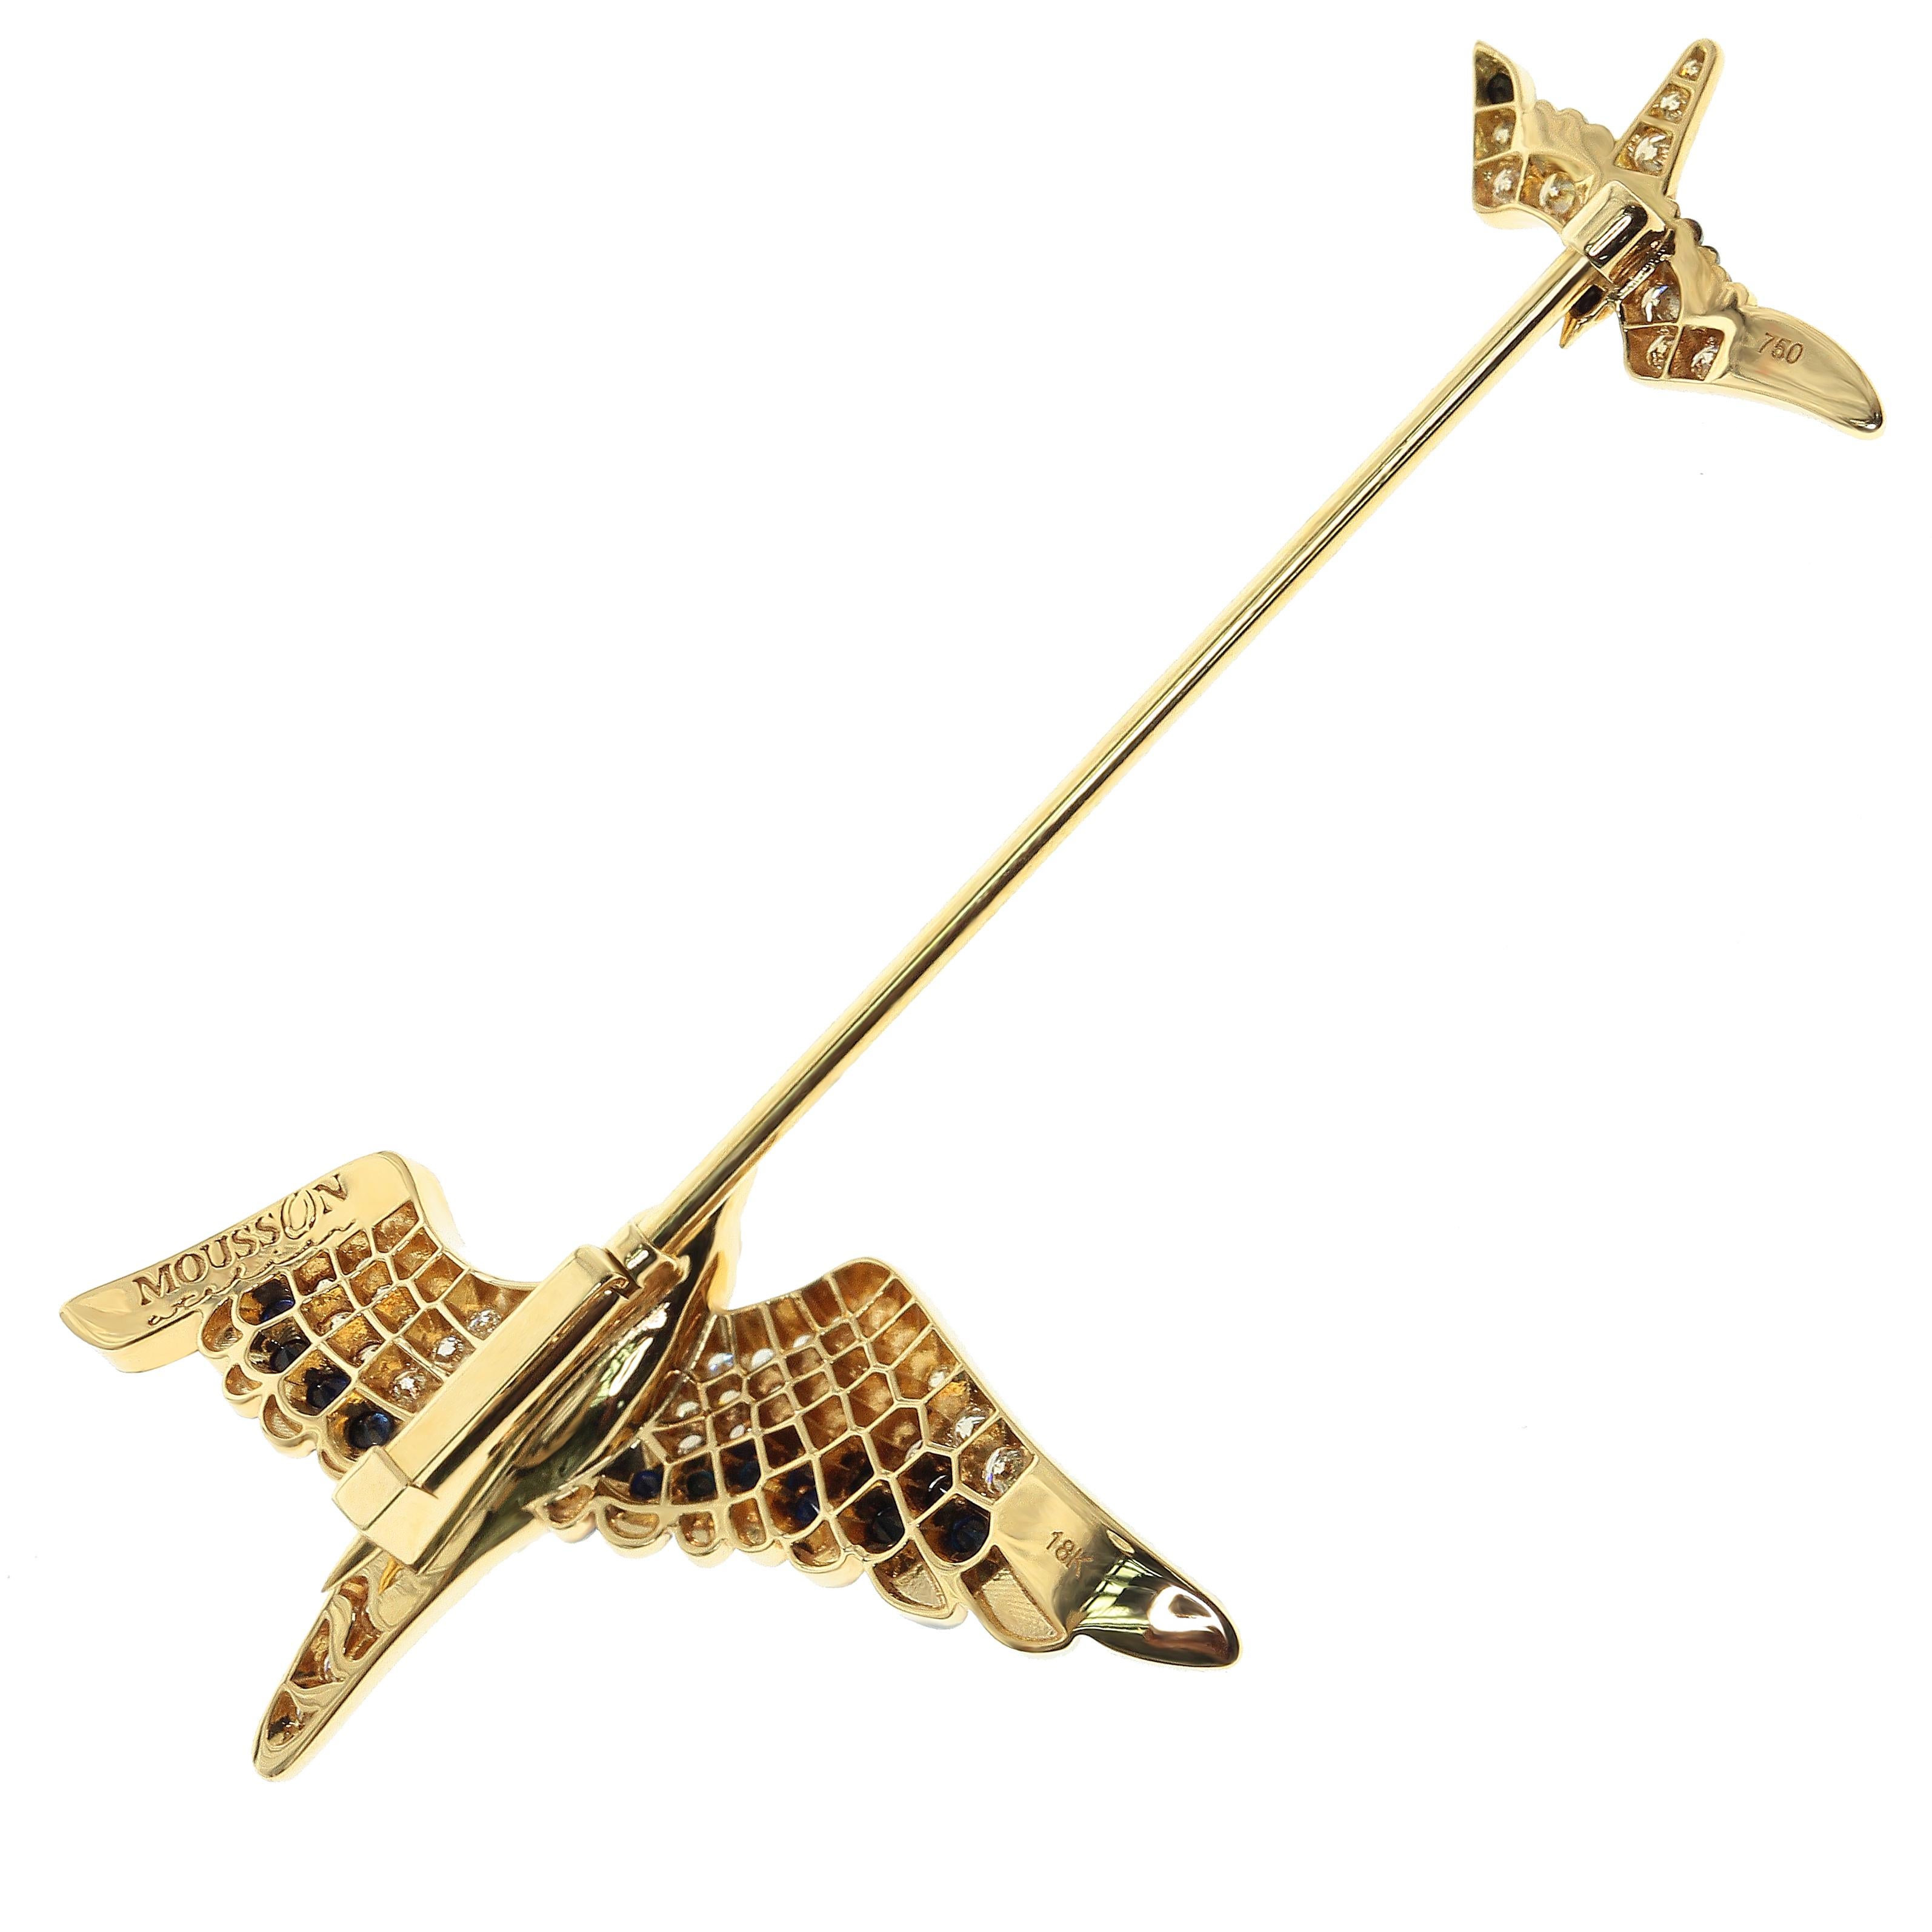 White and Brown Diamonds Black Sapphire 18 Karat Yellow Gold Seagull Pin Brooch
Highly detailed Seagull Pin Brooch. Combination of White and Champagne Diamonds gives fully impression that they are alive. This Pin represents two Seagulls flying to